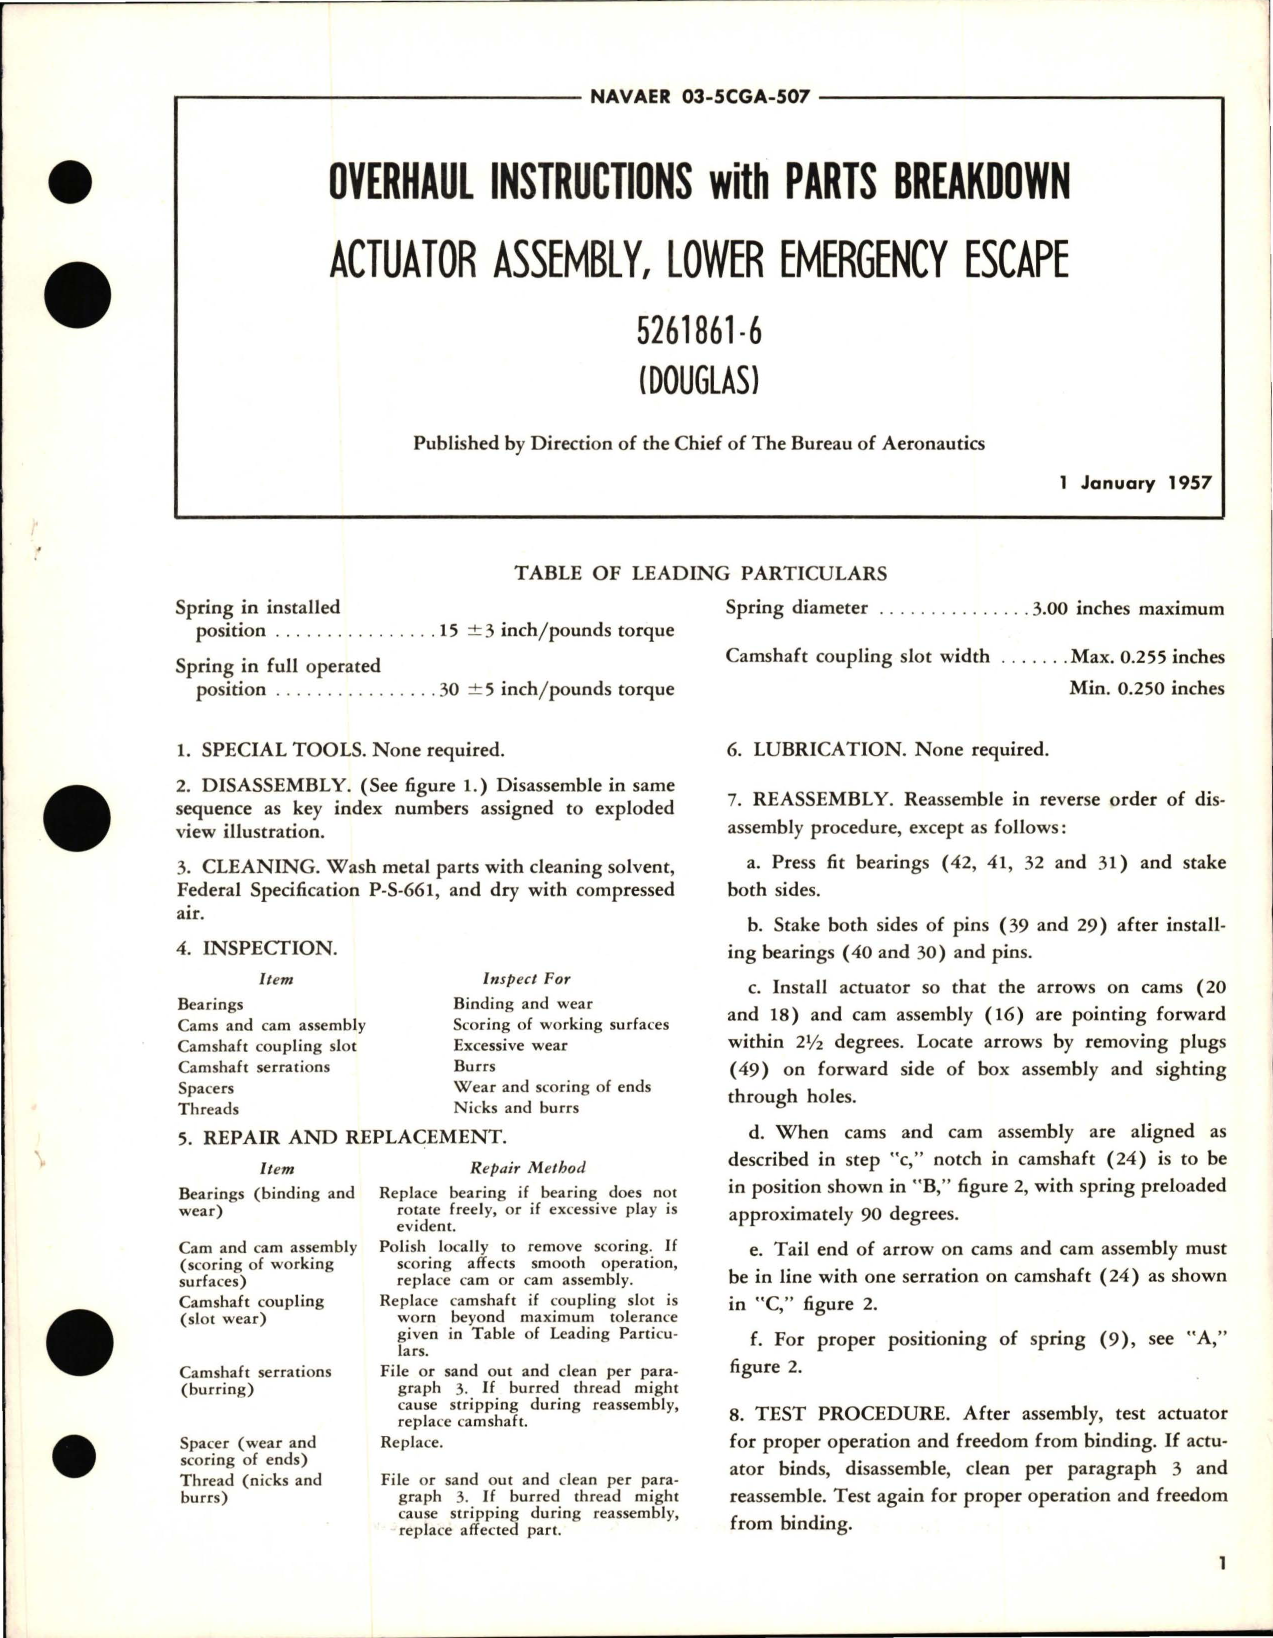 Sample page 1 from AirCorps Library document: Overhaul Instructions with Parts Breakdown for Actuator Assembly, Lower Emergency Escape - 5261861-6